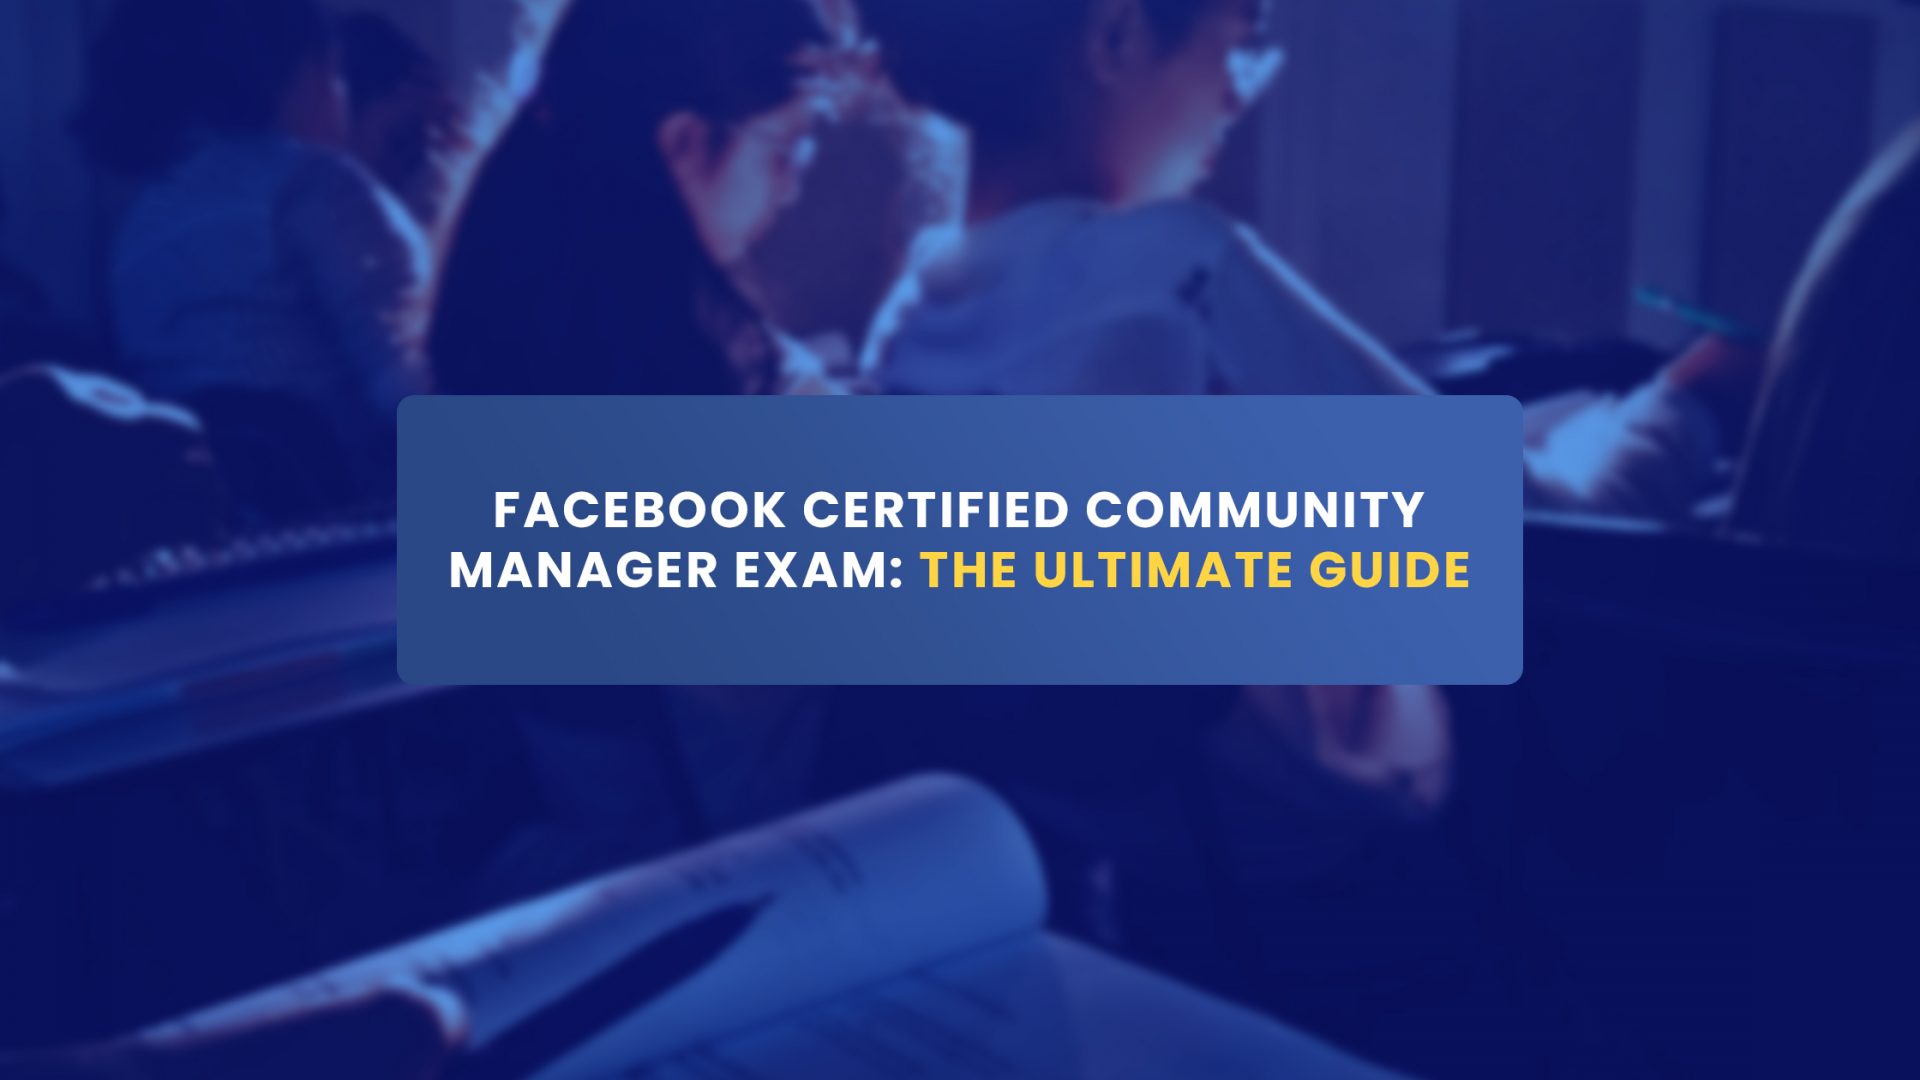 A Guide to Facebook Certified Community Manager Exam